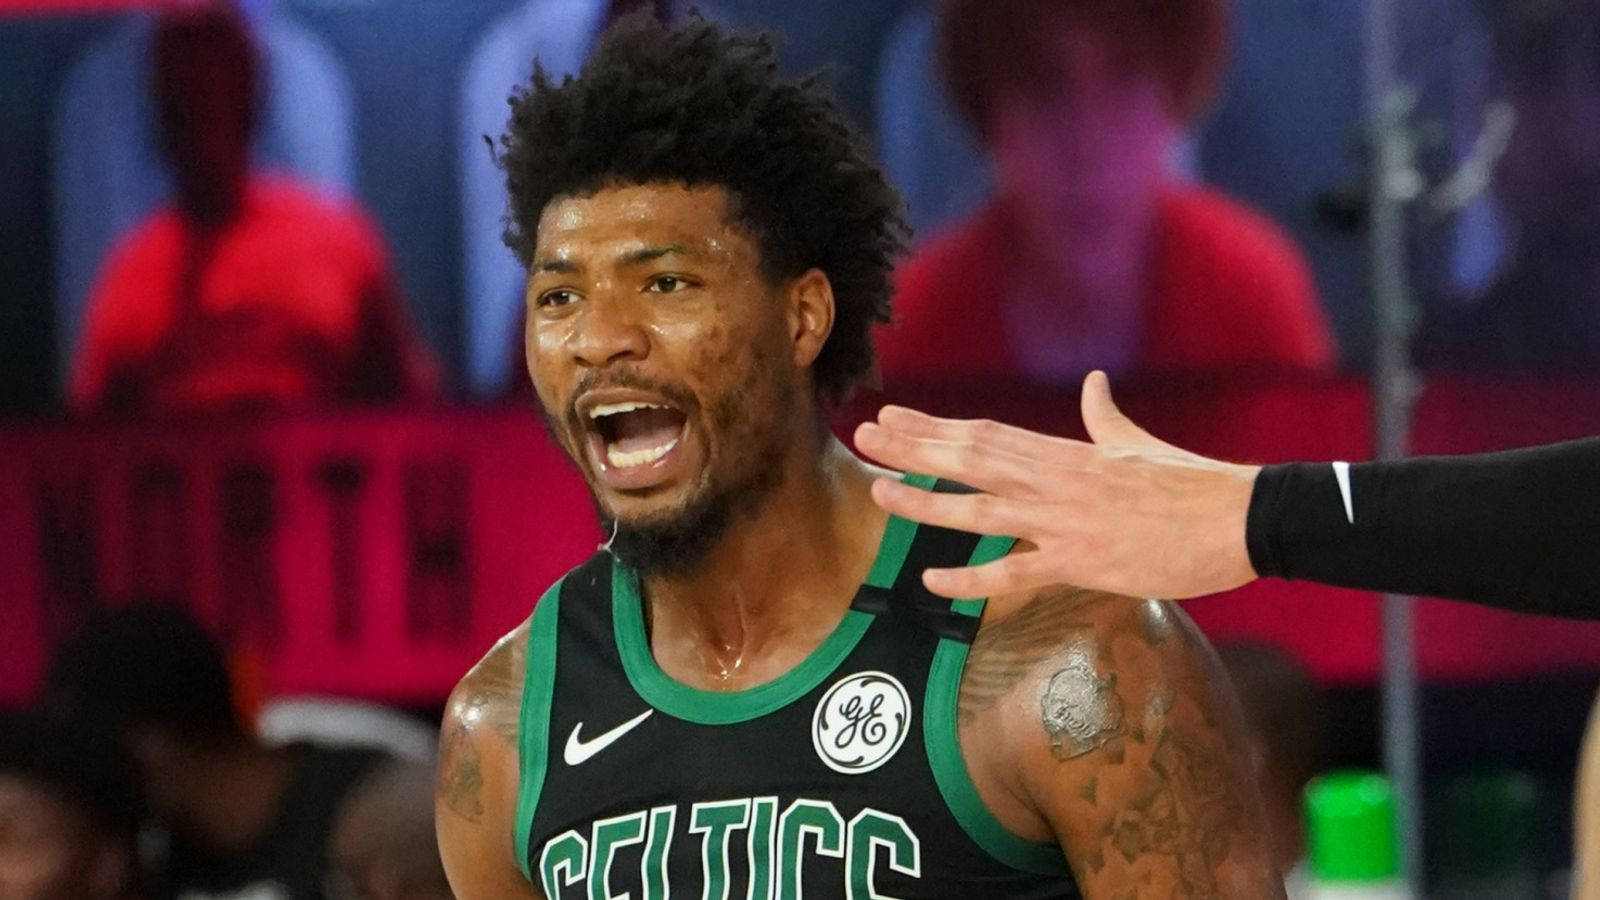 Marcussmart Skriker Ut För Seger. (context: This Could Be A Possible Caption For A Basketball-themed Wallpaper Featuring Marcus Smart.) Wallpaper